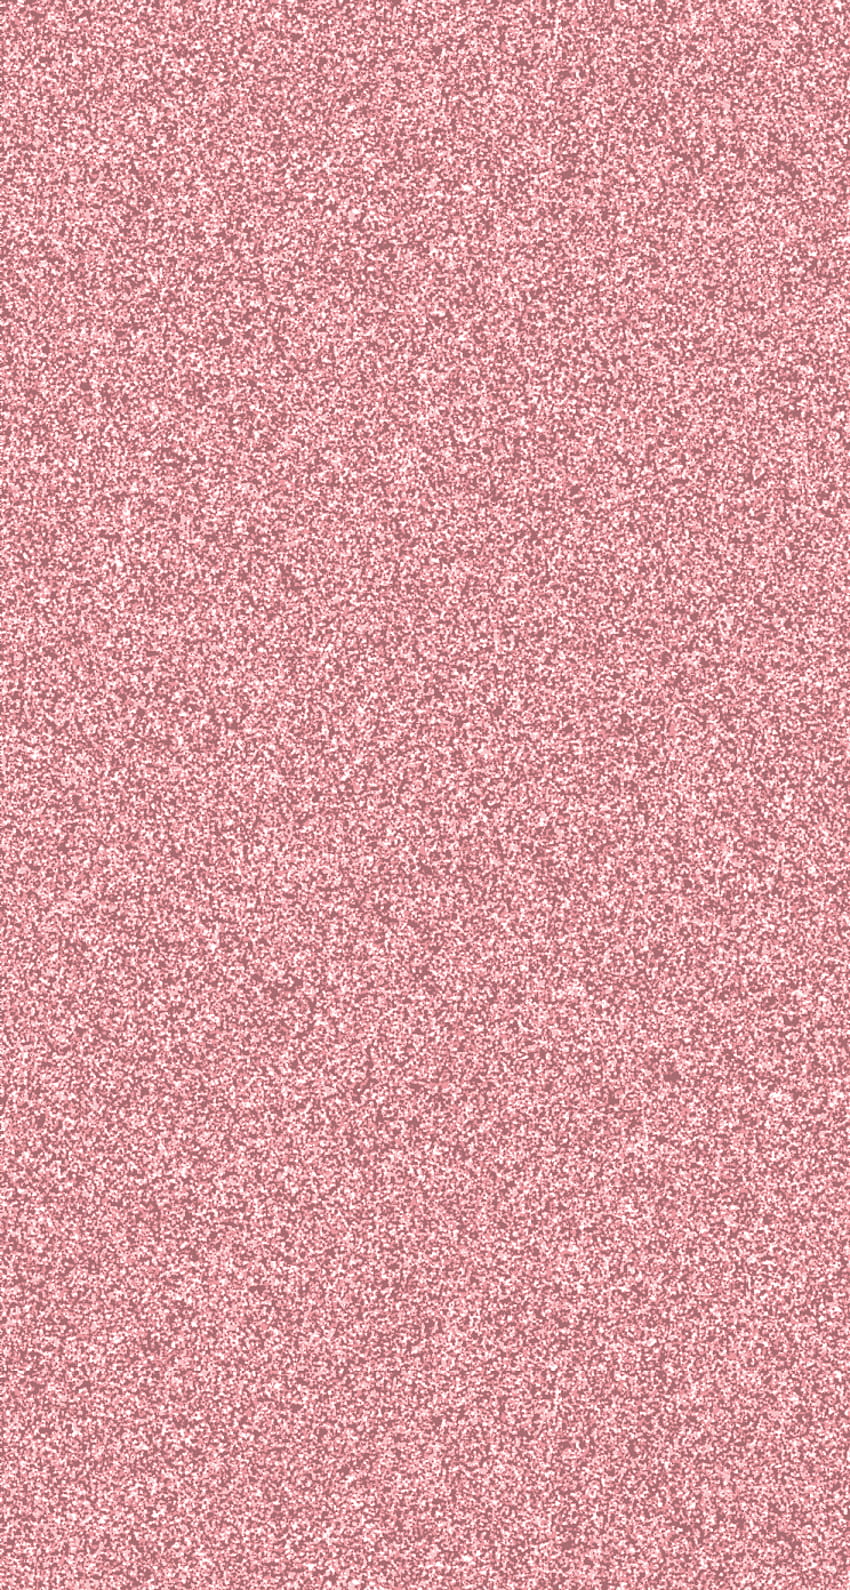 Mauve Glitter, Sparkle, Glow Phone - Background. Color, Rose Shades HD phone wallpaper